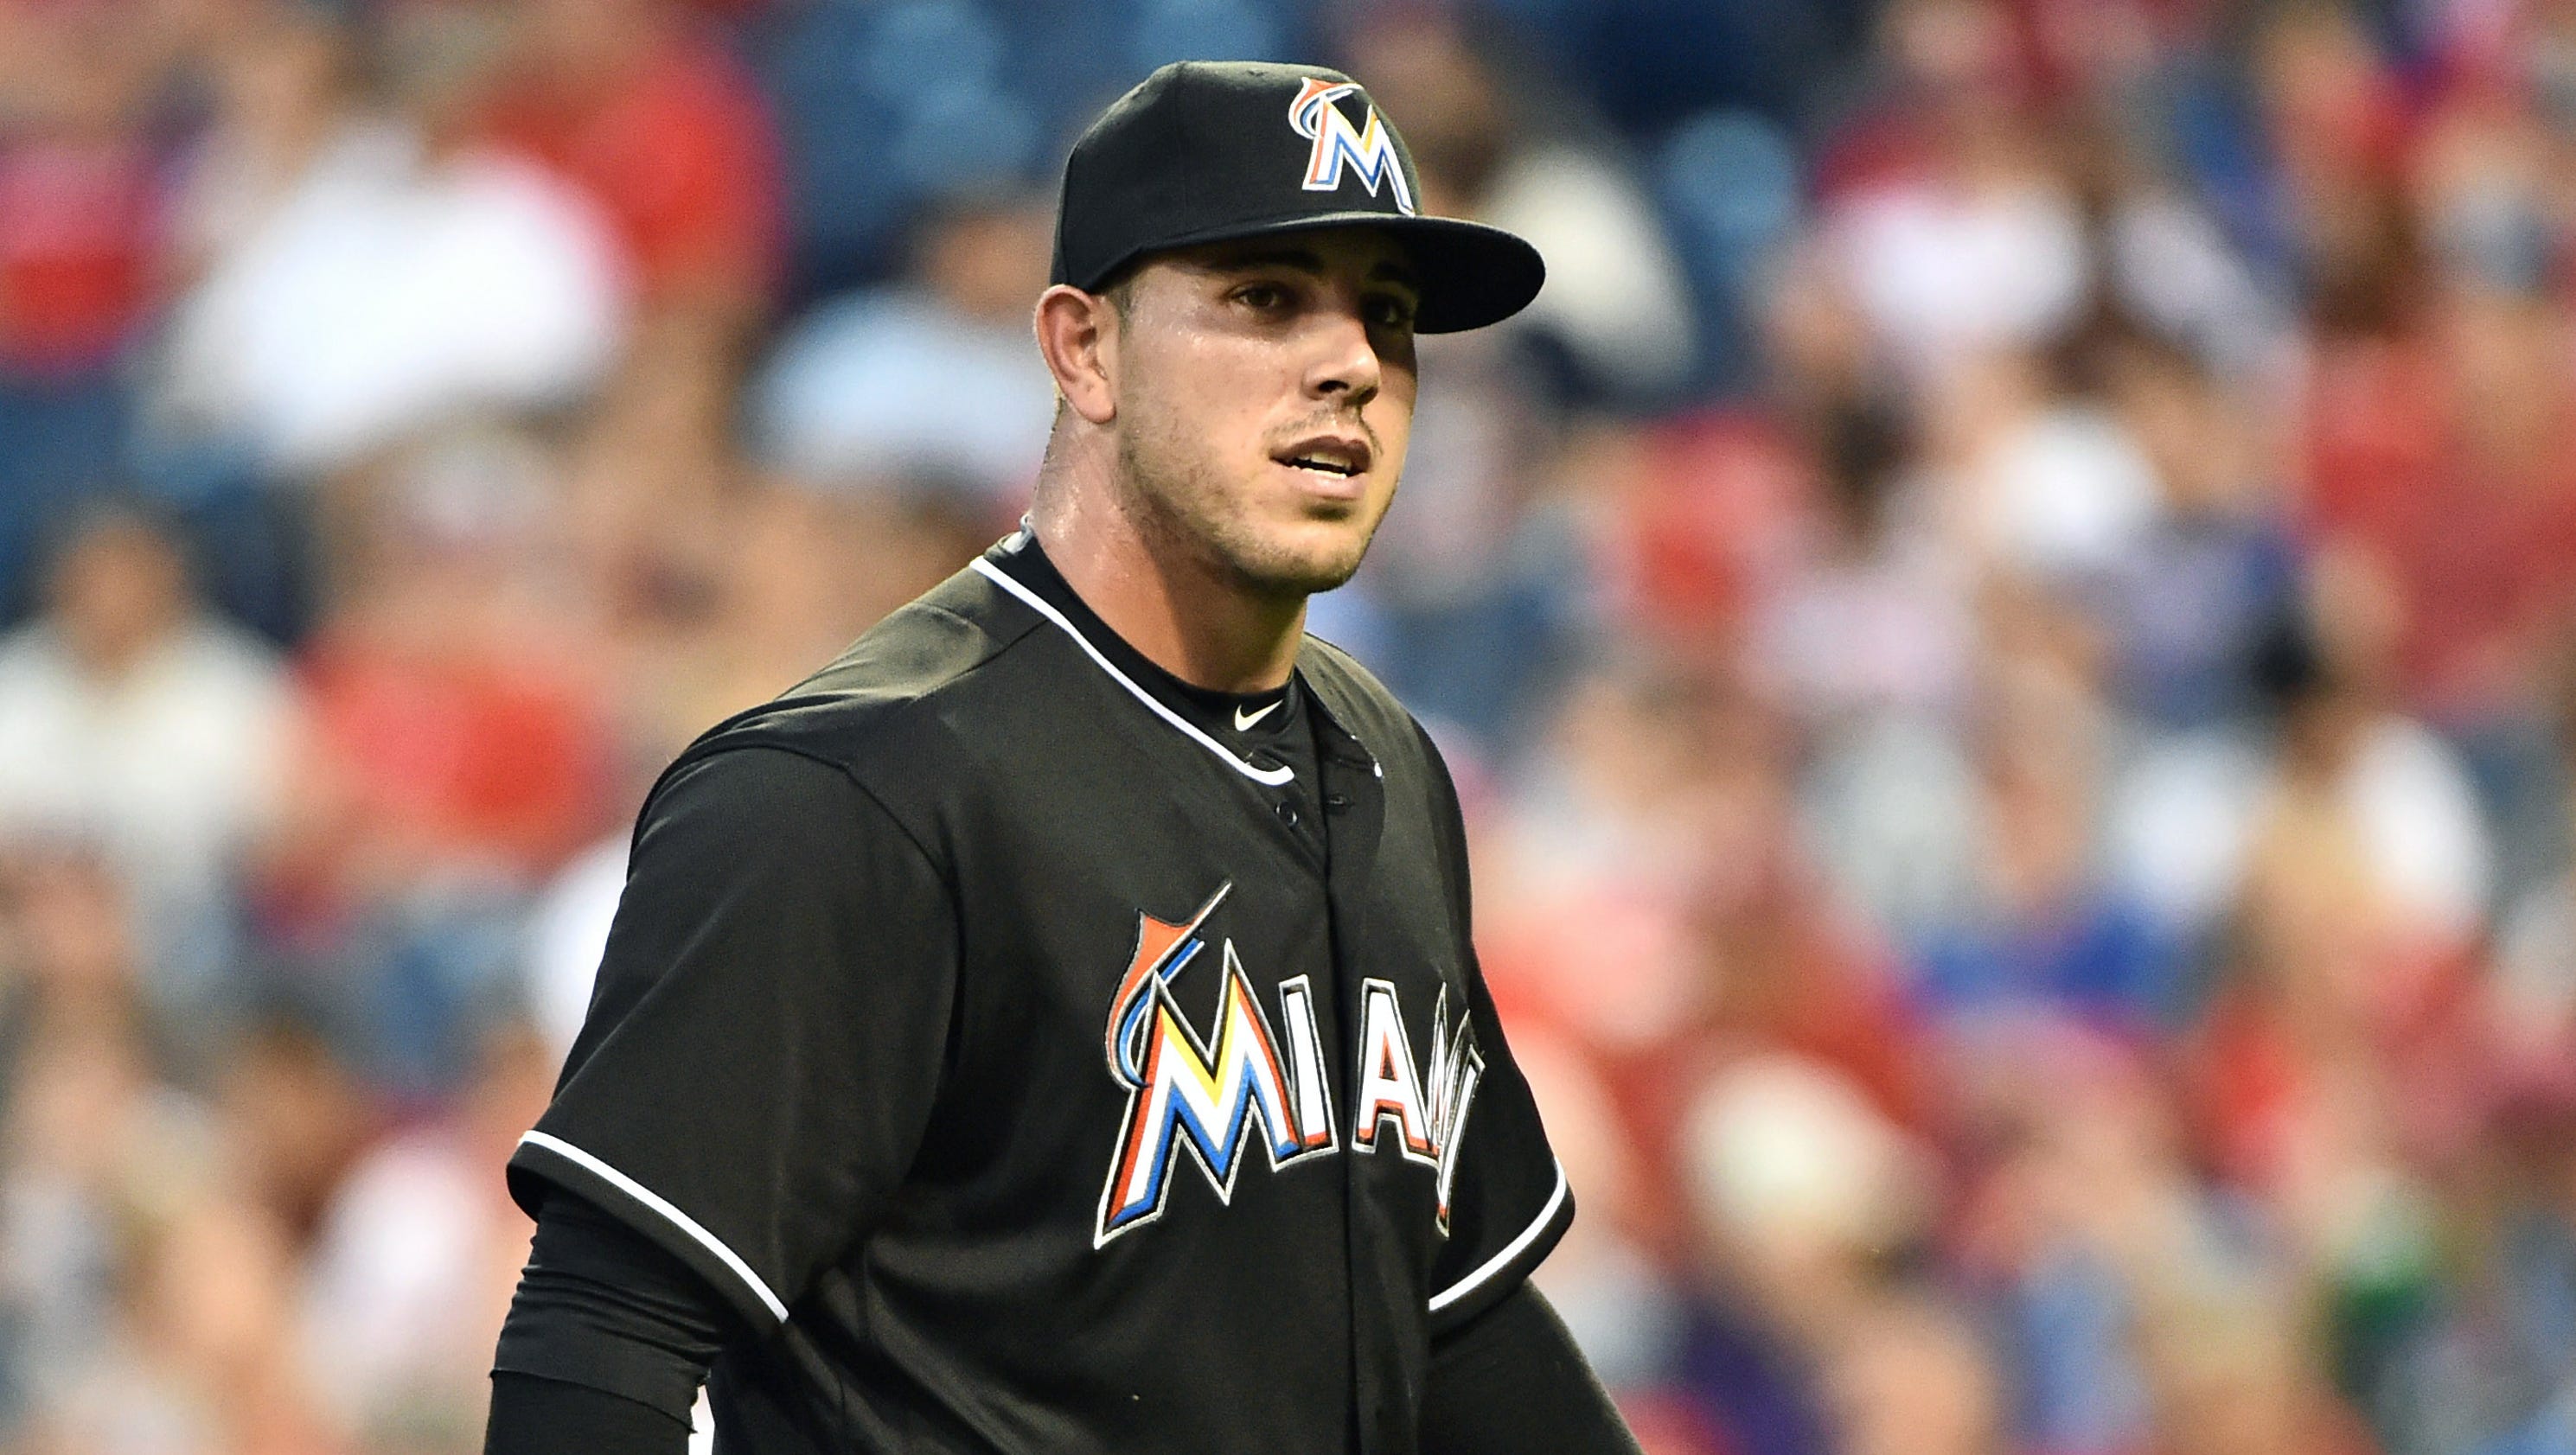 Official: Jose Fernandez died from crash impact, not drowning